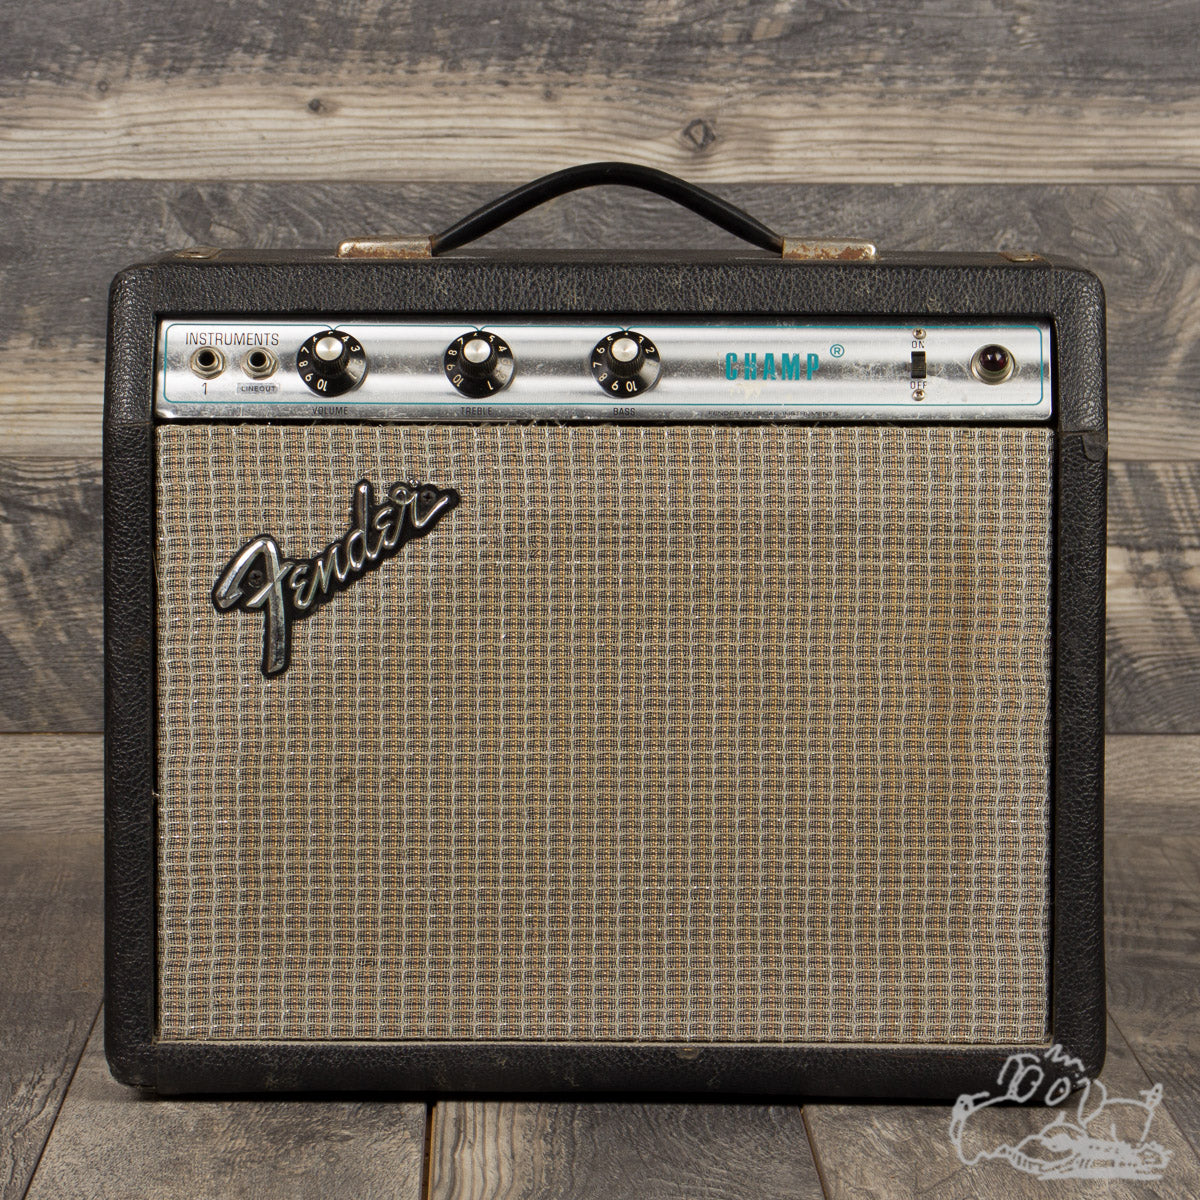 1976 Fender Champ (Silverface) - Original Speaker (Line-Out Modified)